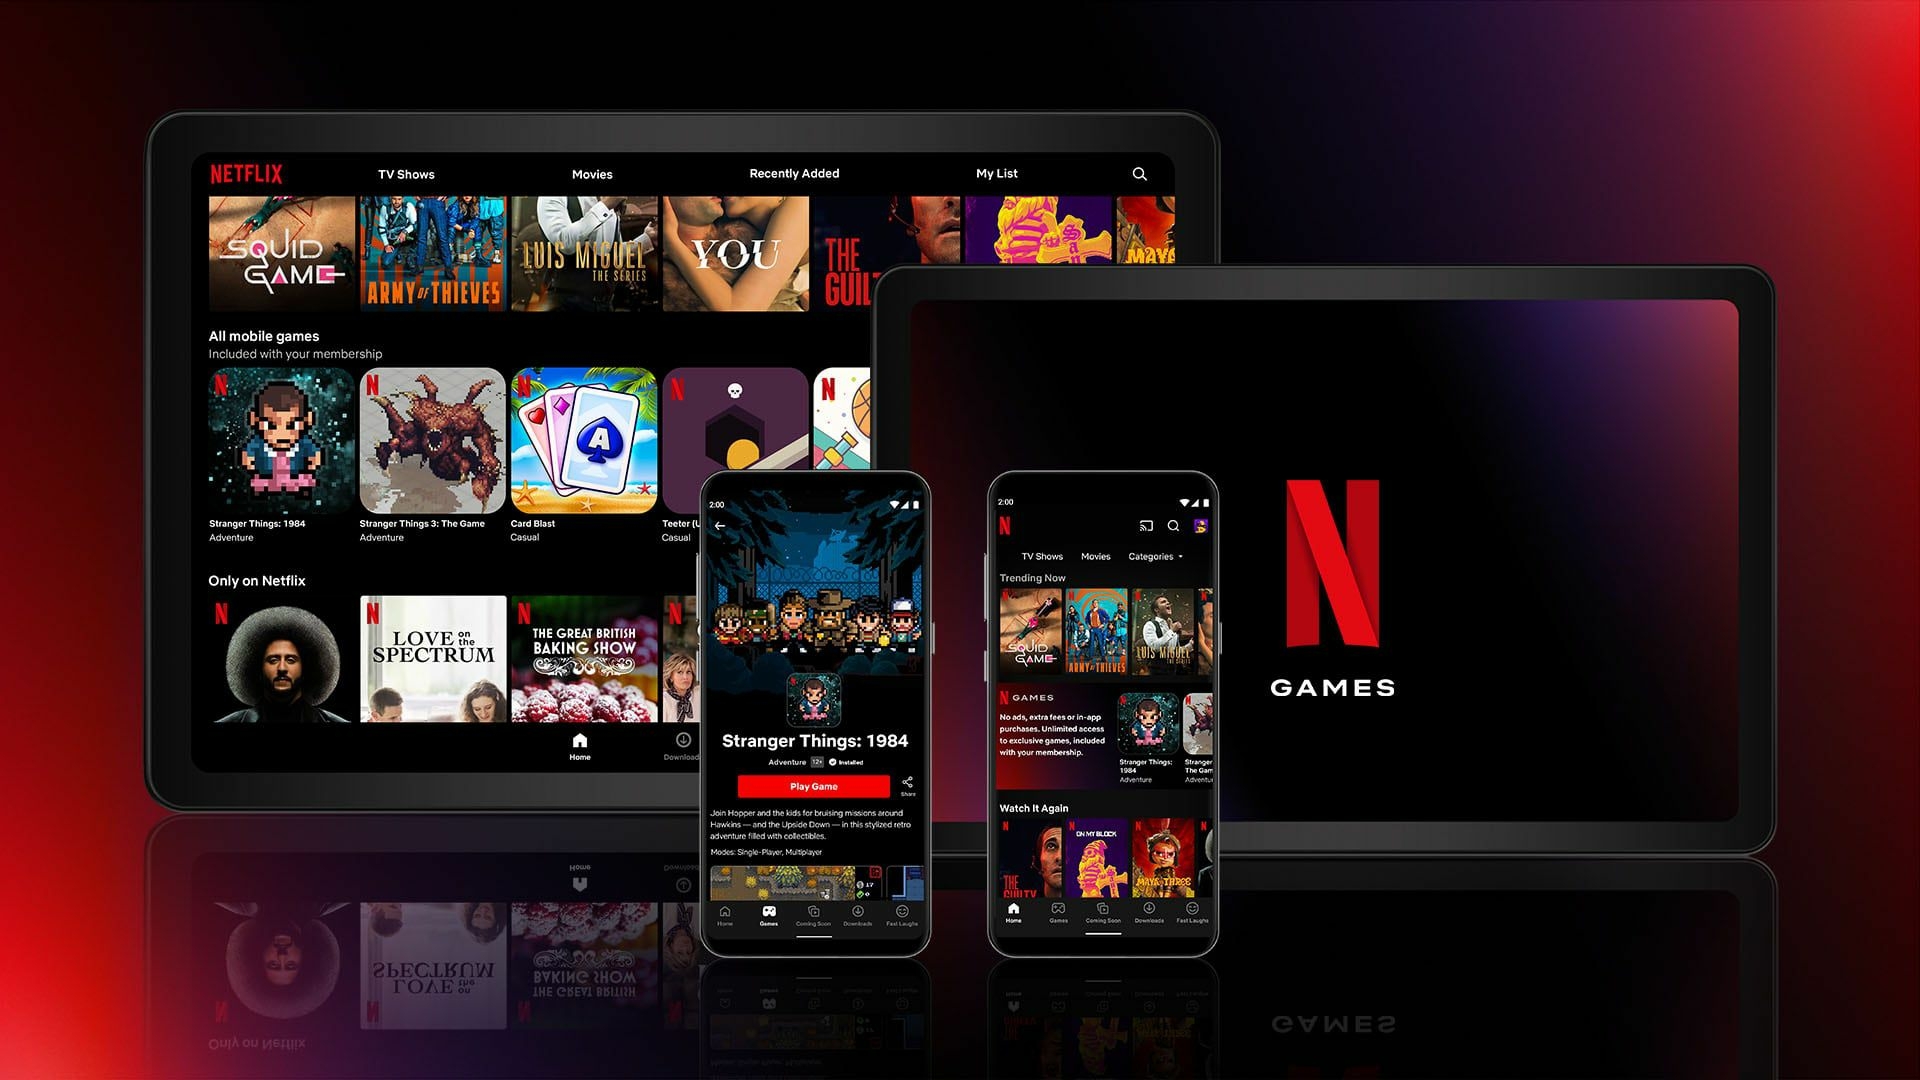 Netflix games that engage less than 1 percent of subscribers